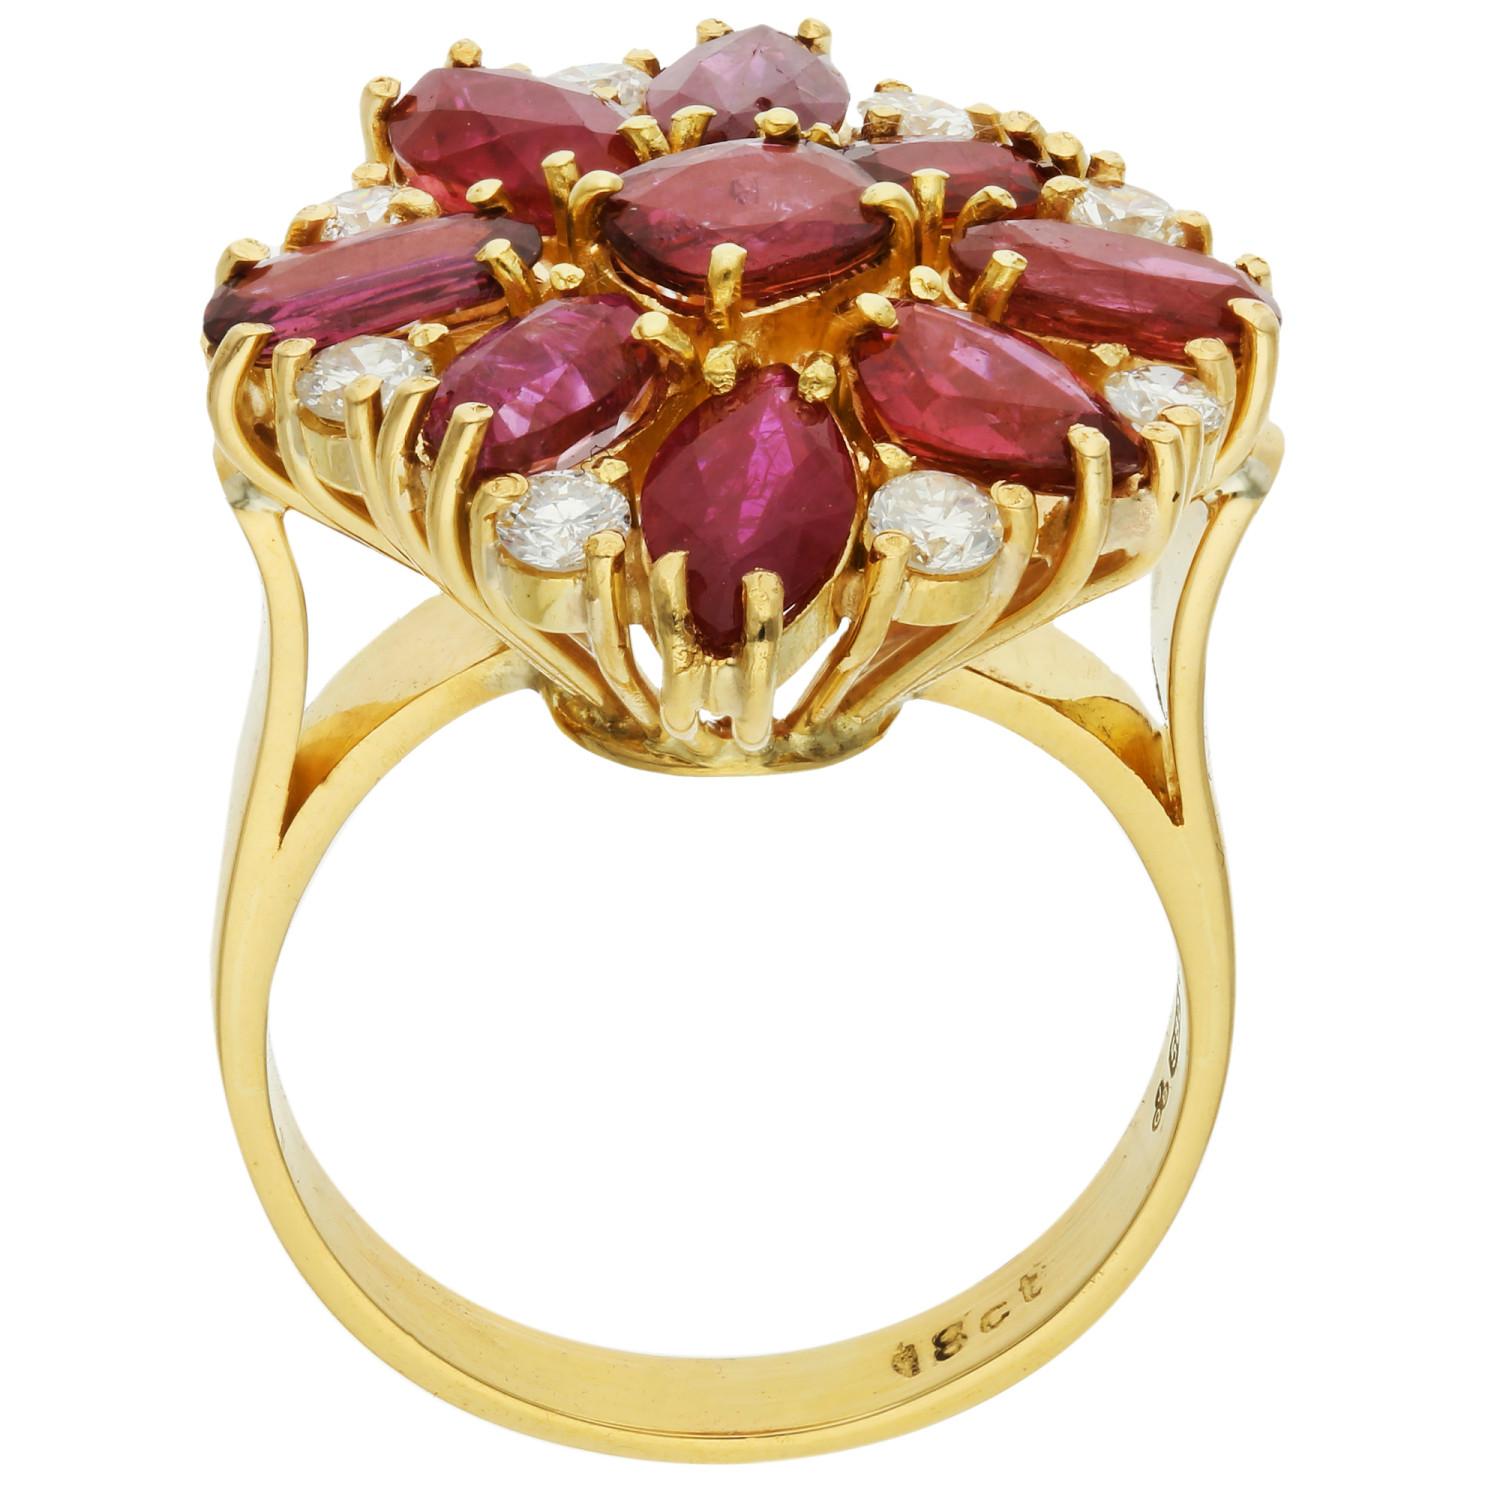 Ignite your style with our Pre-loved 14ct Yellow Gold Ruby & Diamond Ring, a flamboyant masterpiece perfect for both dress and cocktail occasions. This exquisite ring showcases a captivating floral design, featuring a vibrant collection of various